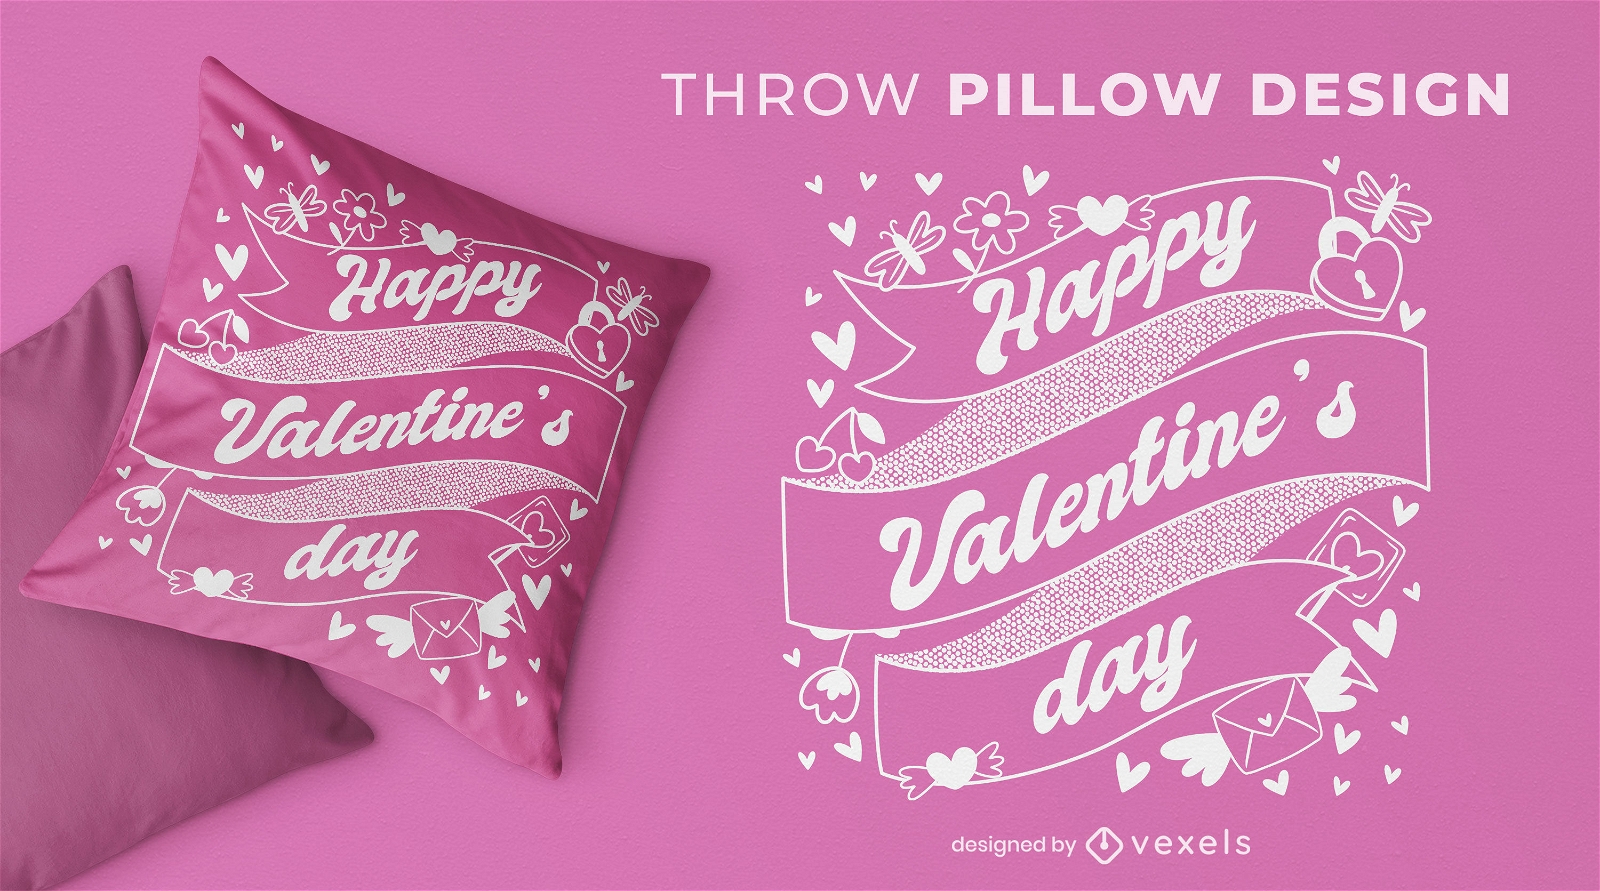 Valentines day lettering throw pillow design